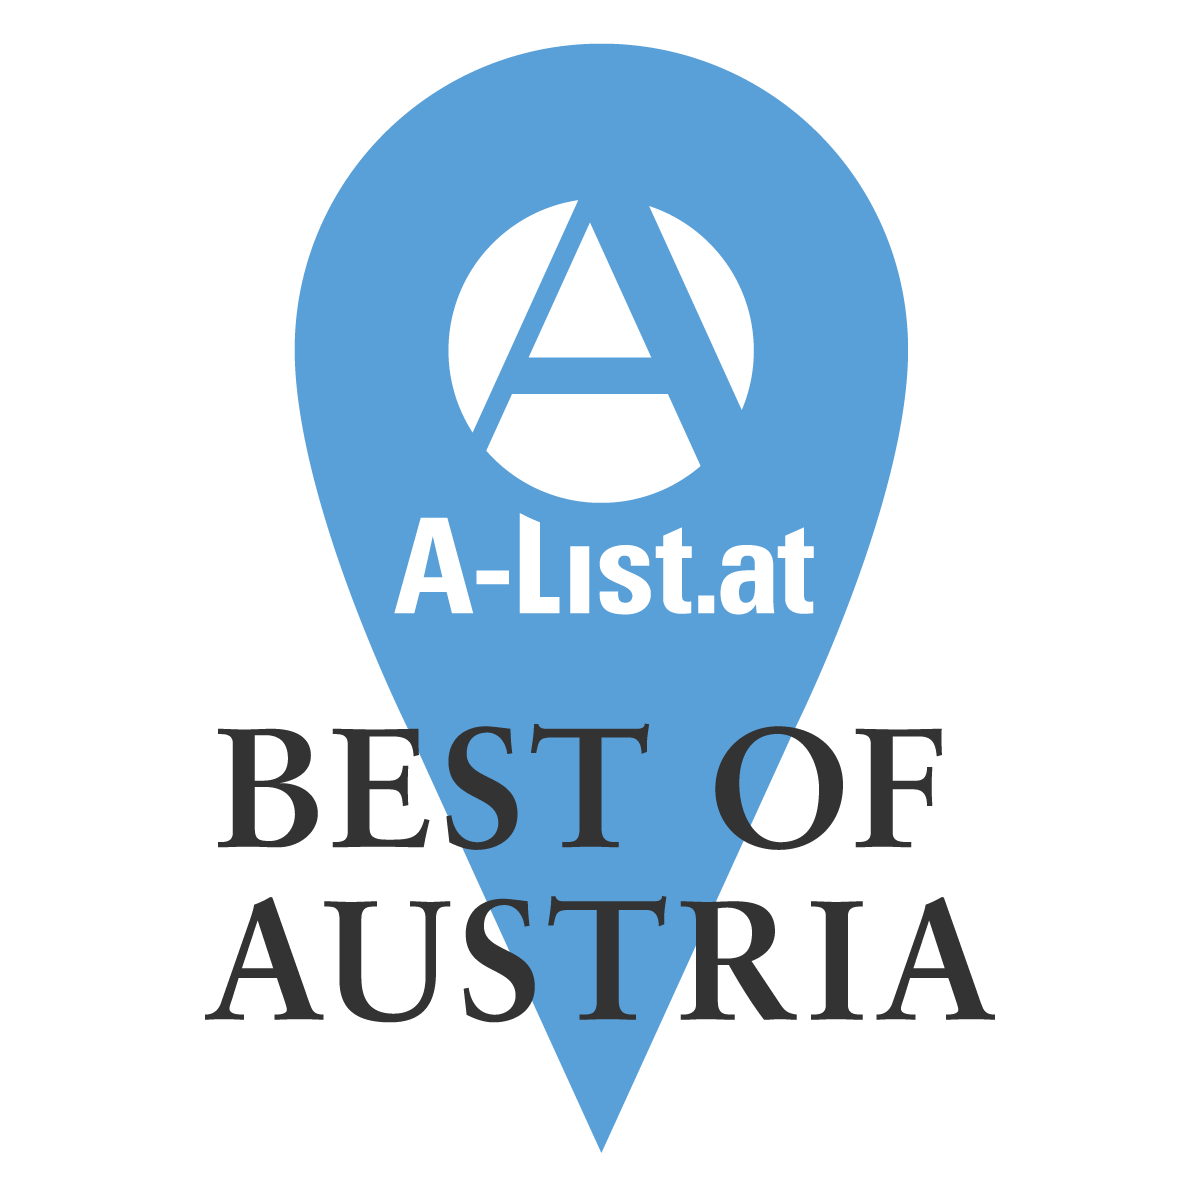 A-List-at-10-must-see-galleries-in-linz-galerie-dumas-linz